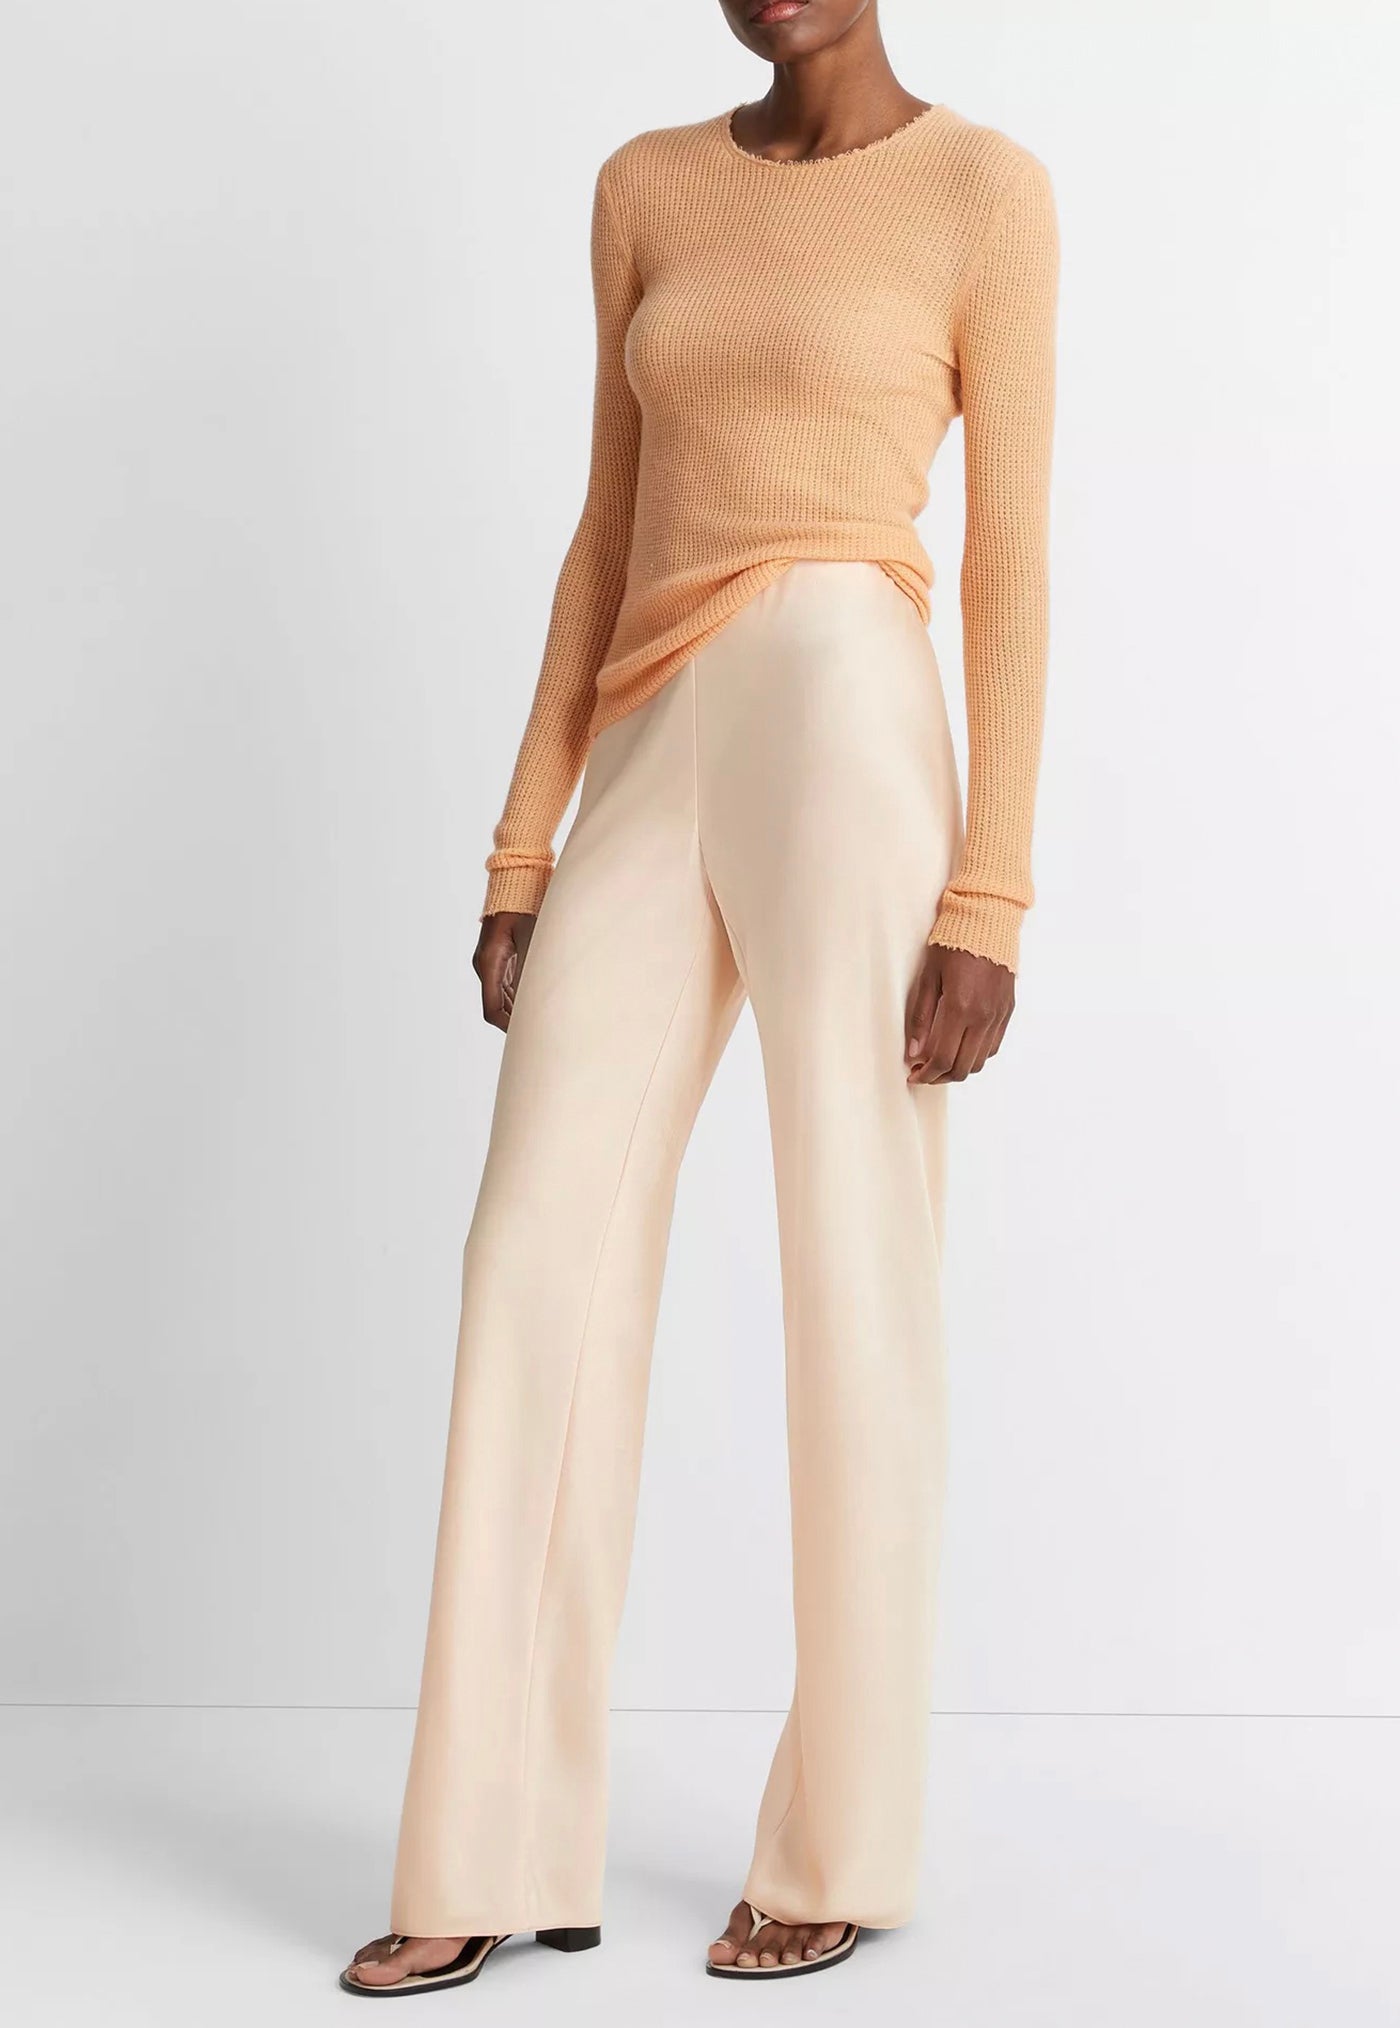 High Waist Satin Pant - Cantaloupe sold by Angel Divine